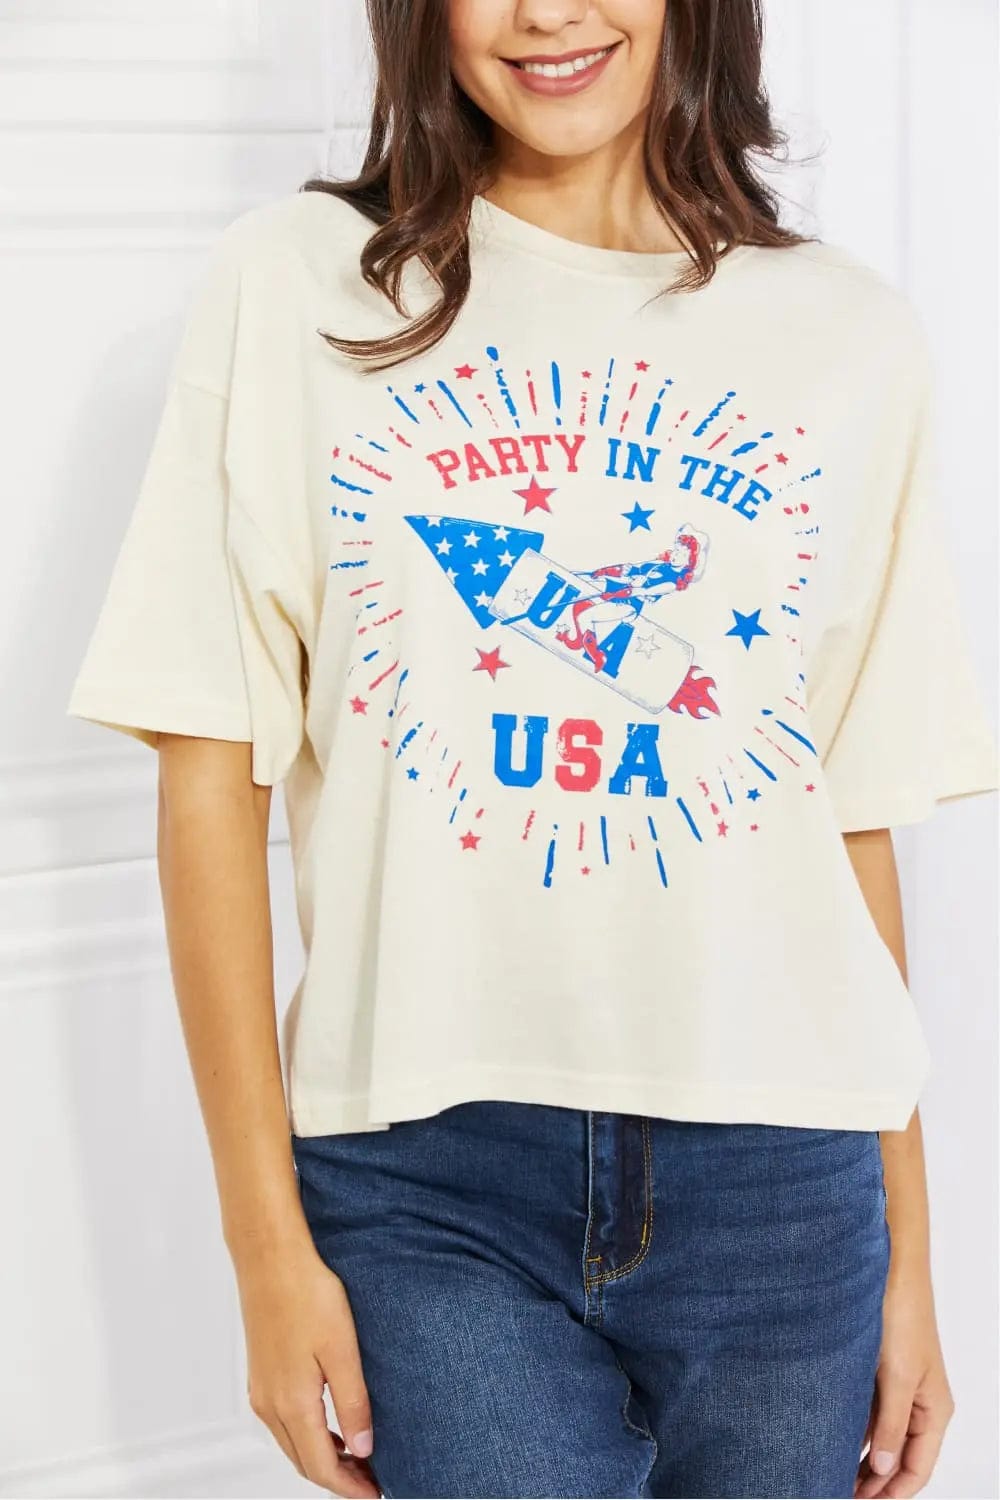 mineB Party In The USA Graphic Crop Top  31.00 MPGD Corp Merchandise